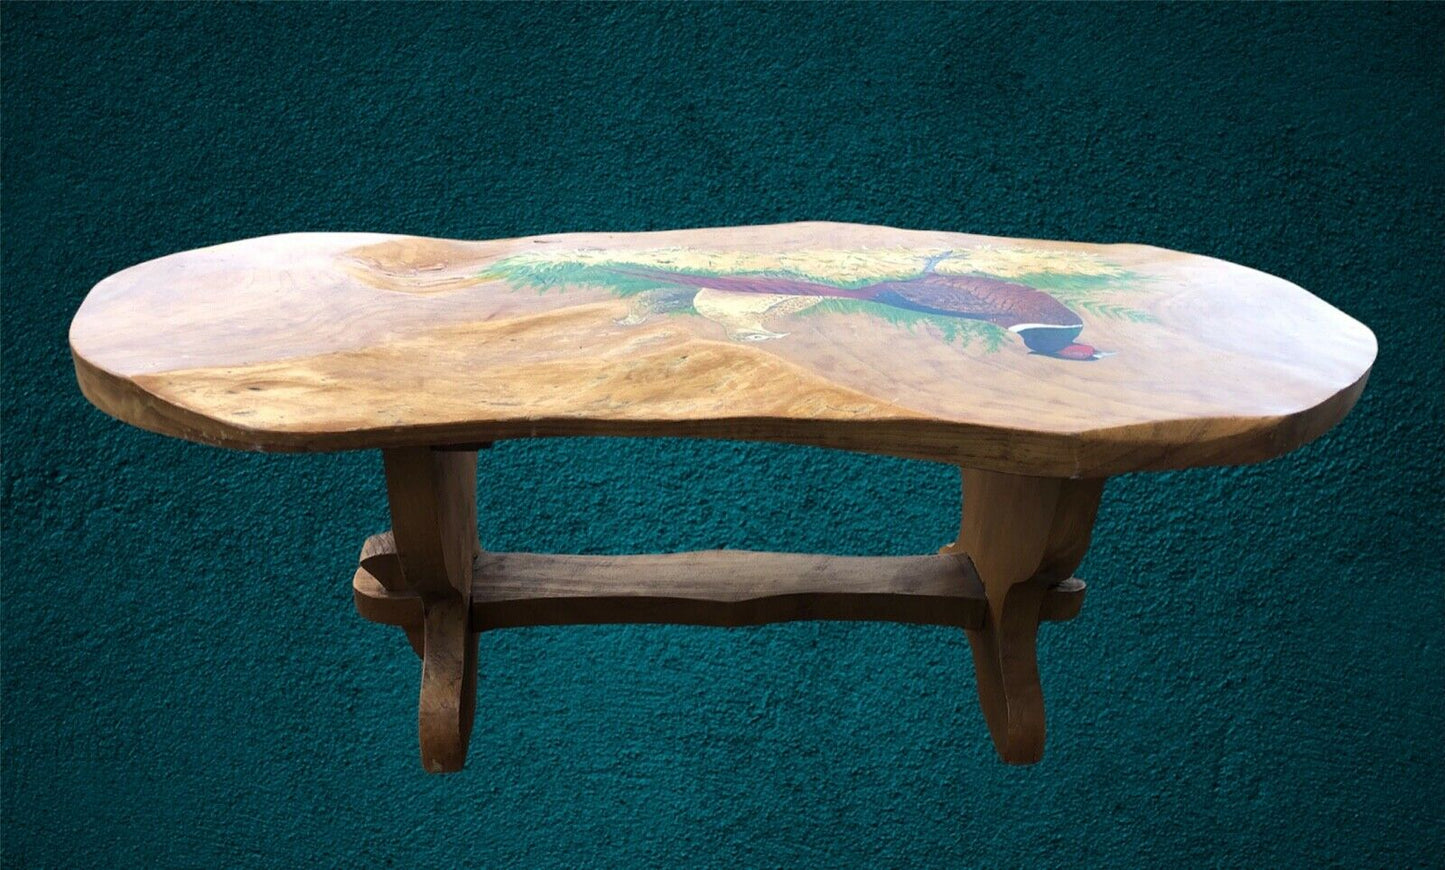 000987.....Heavy Vintage Ash Coffee Table With Hand Painted Decoration ( sold )